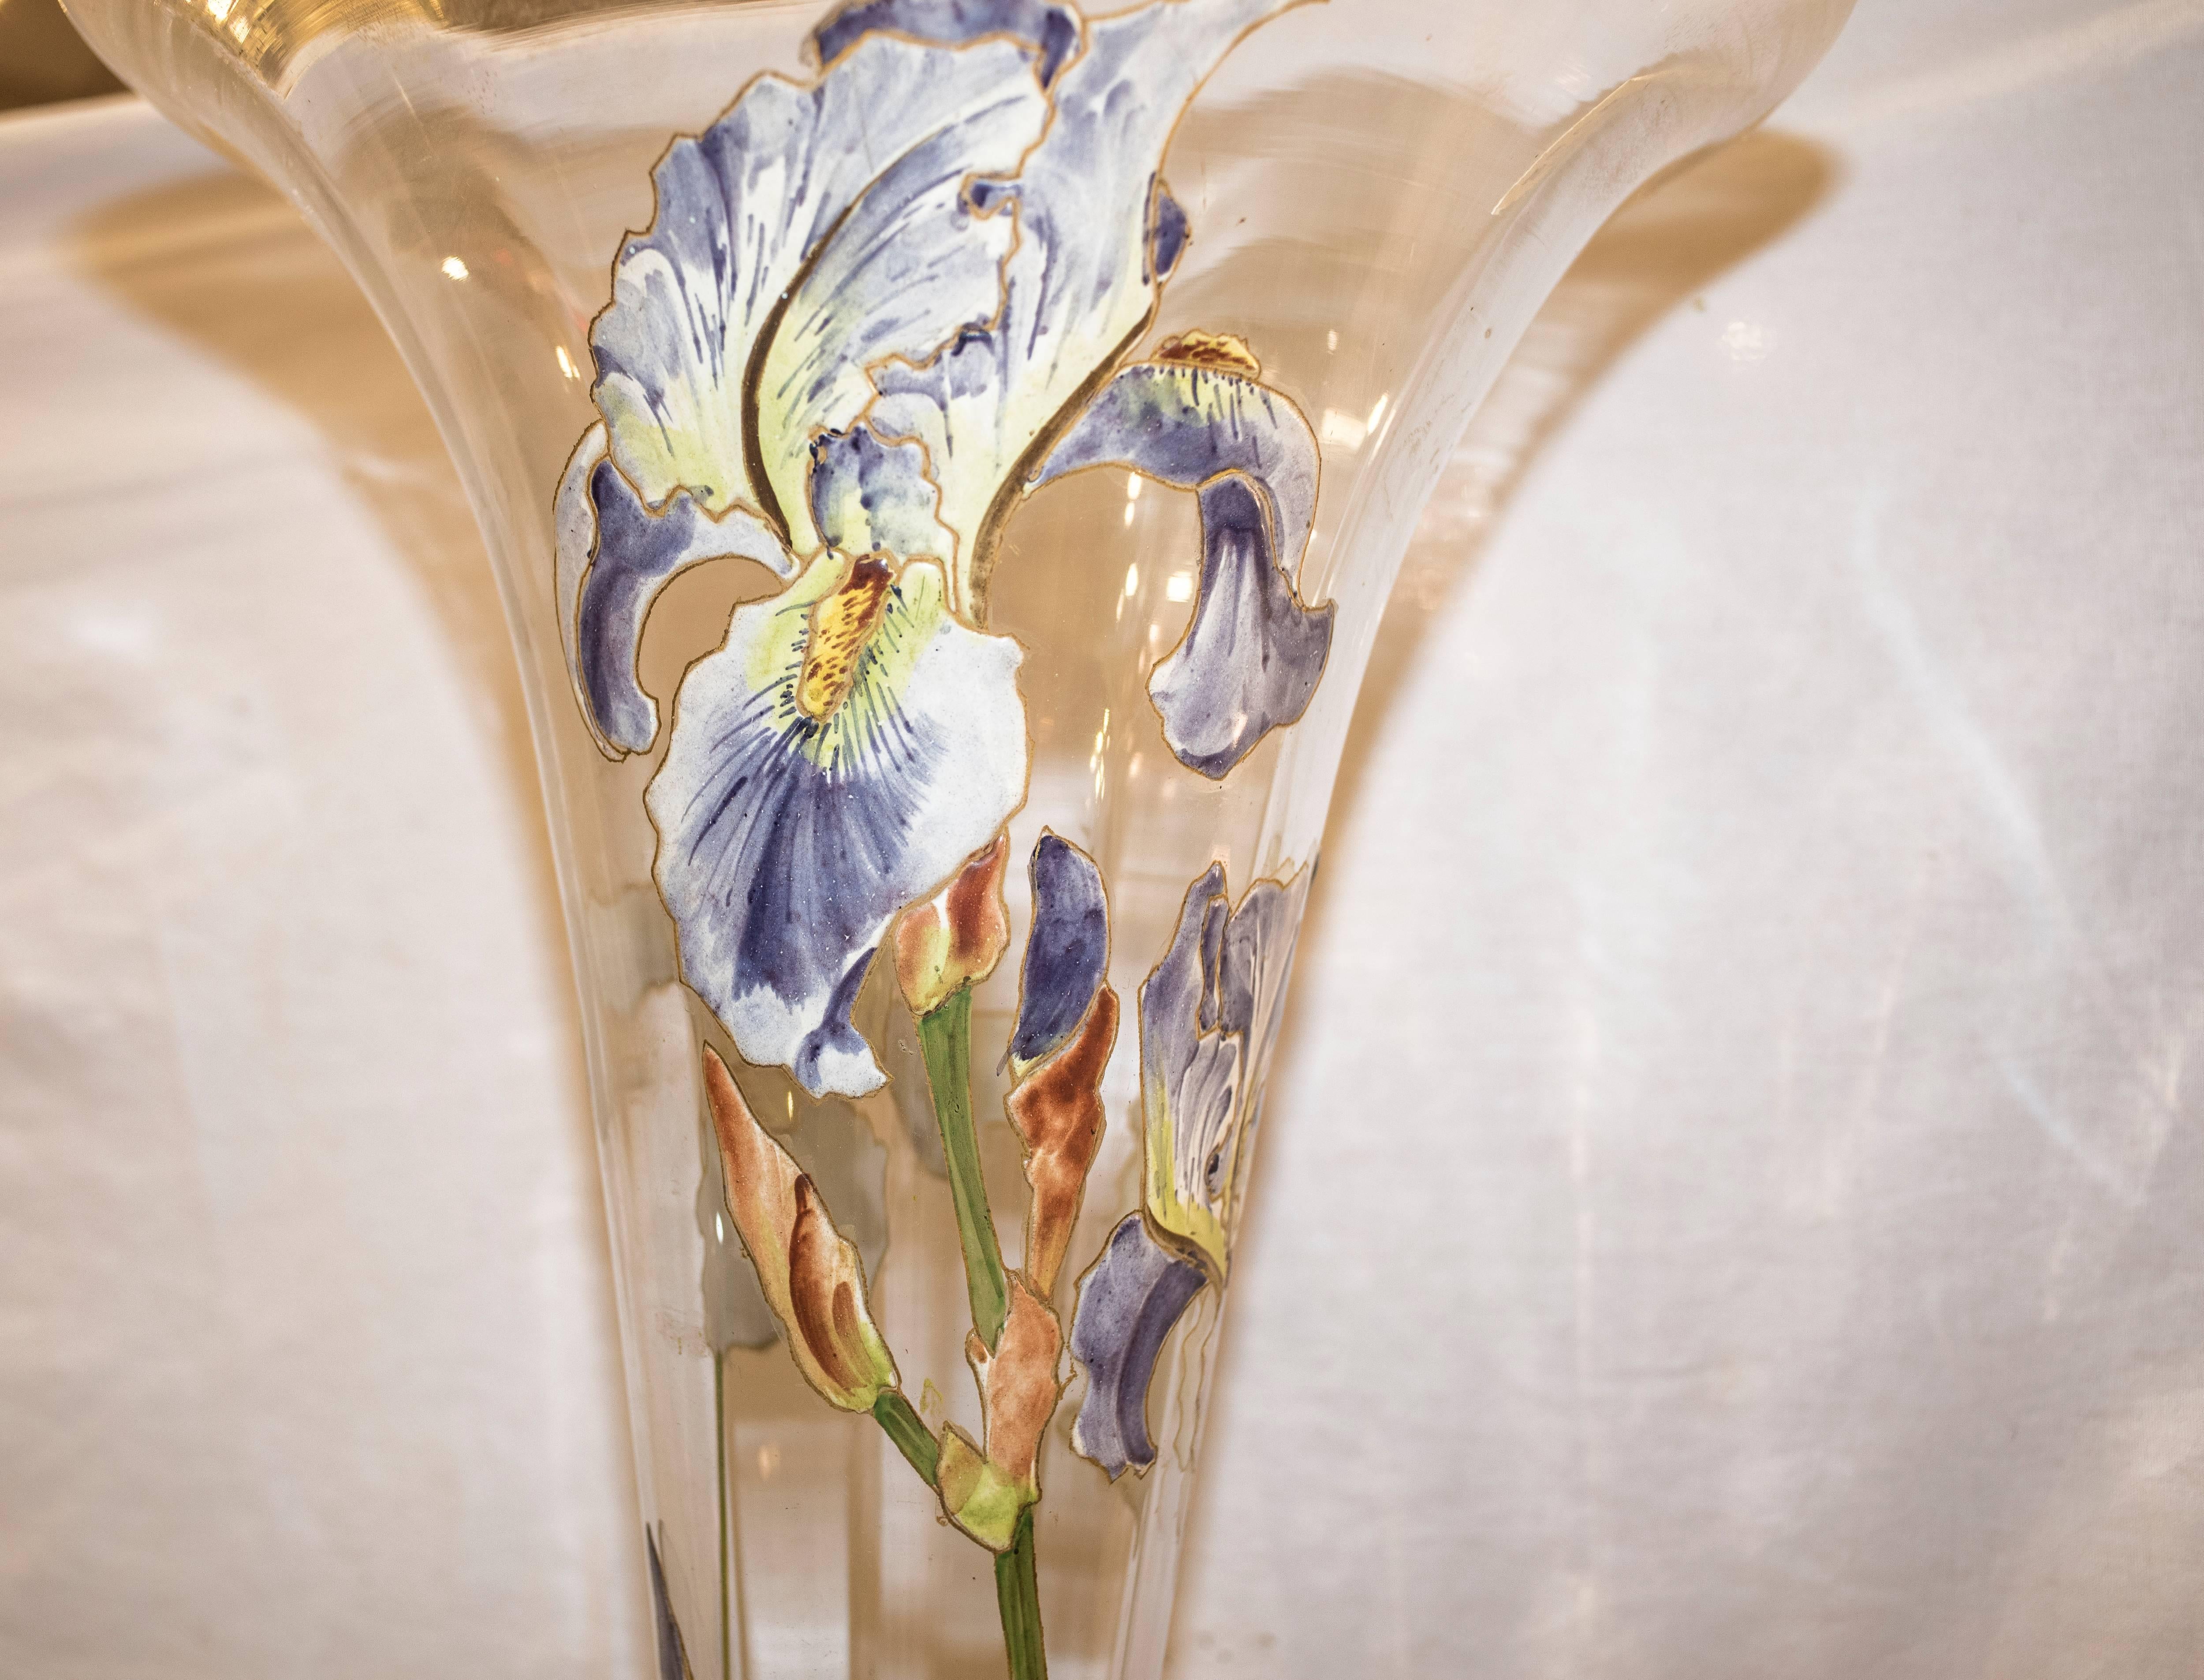 Early 20th Century Art Nouveau Blown Glass Painted with Iris Pattern Vase